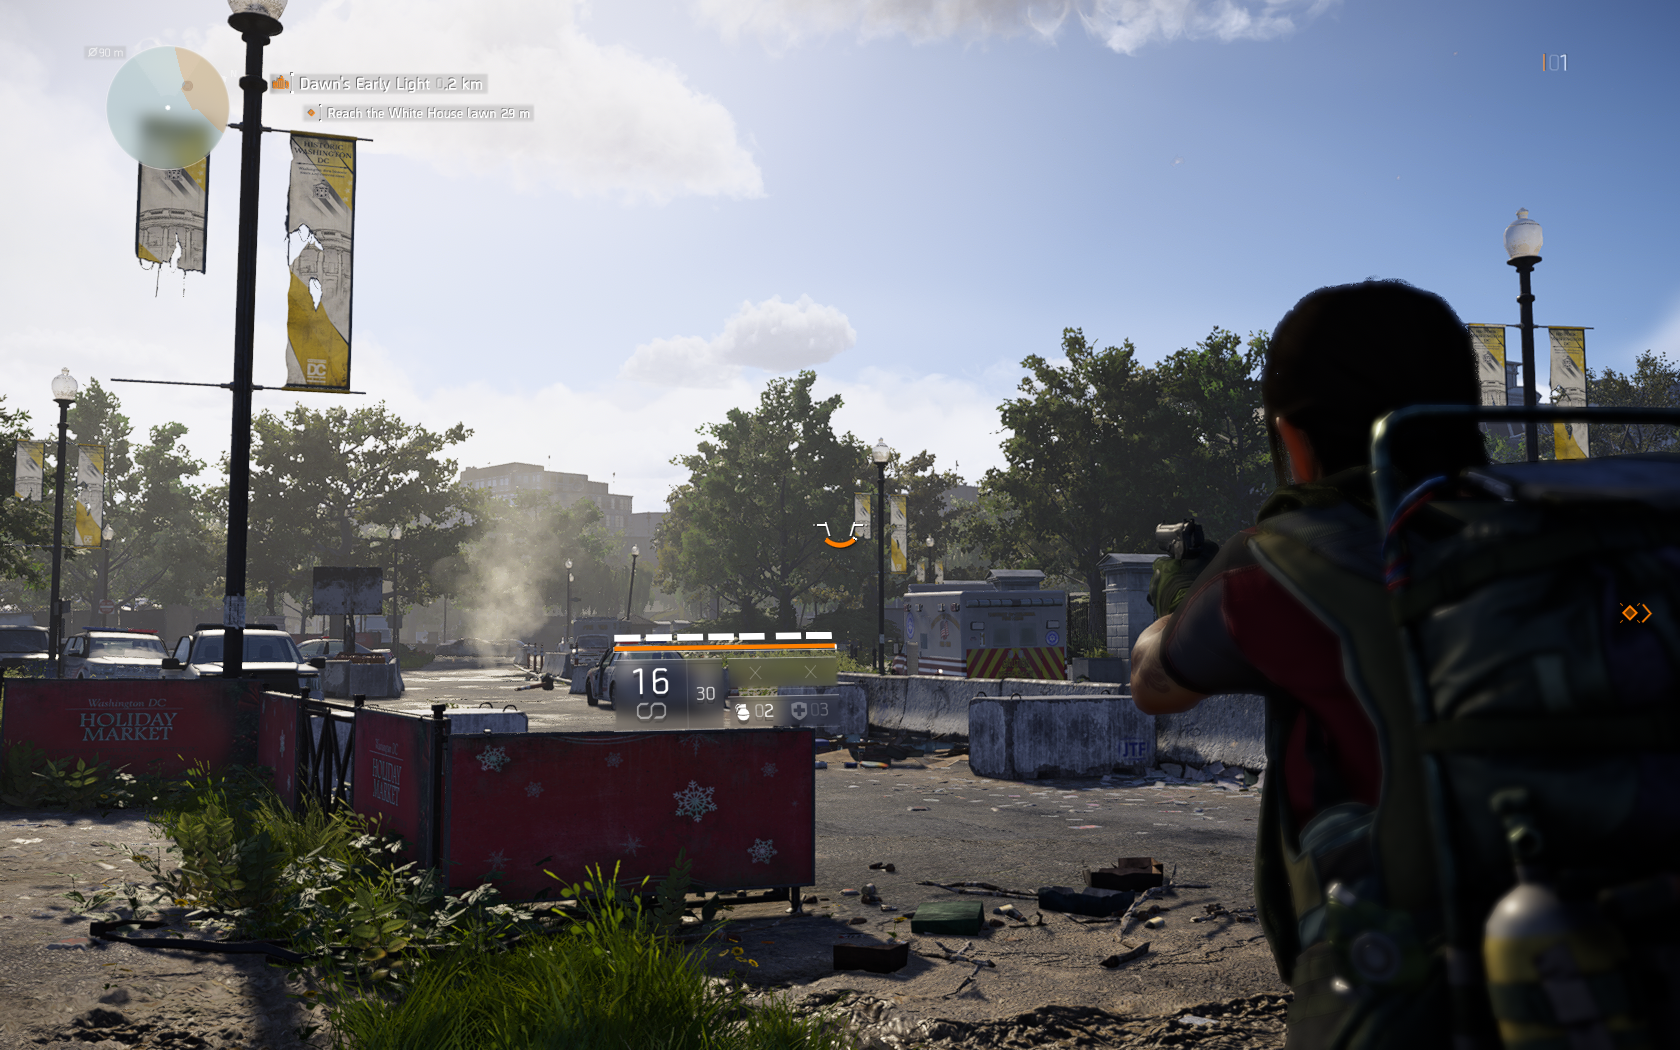 Tom Clancy's The Division 2 Screenshot 2019.03.12 - 10.43.01.73.png